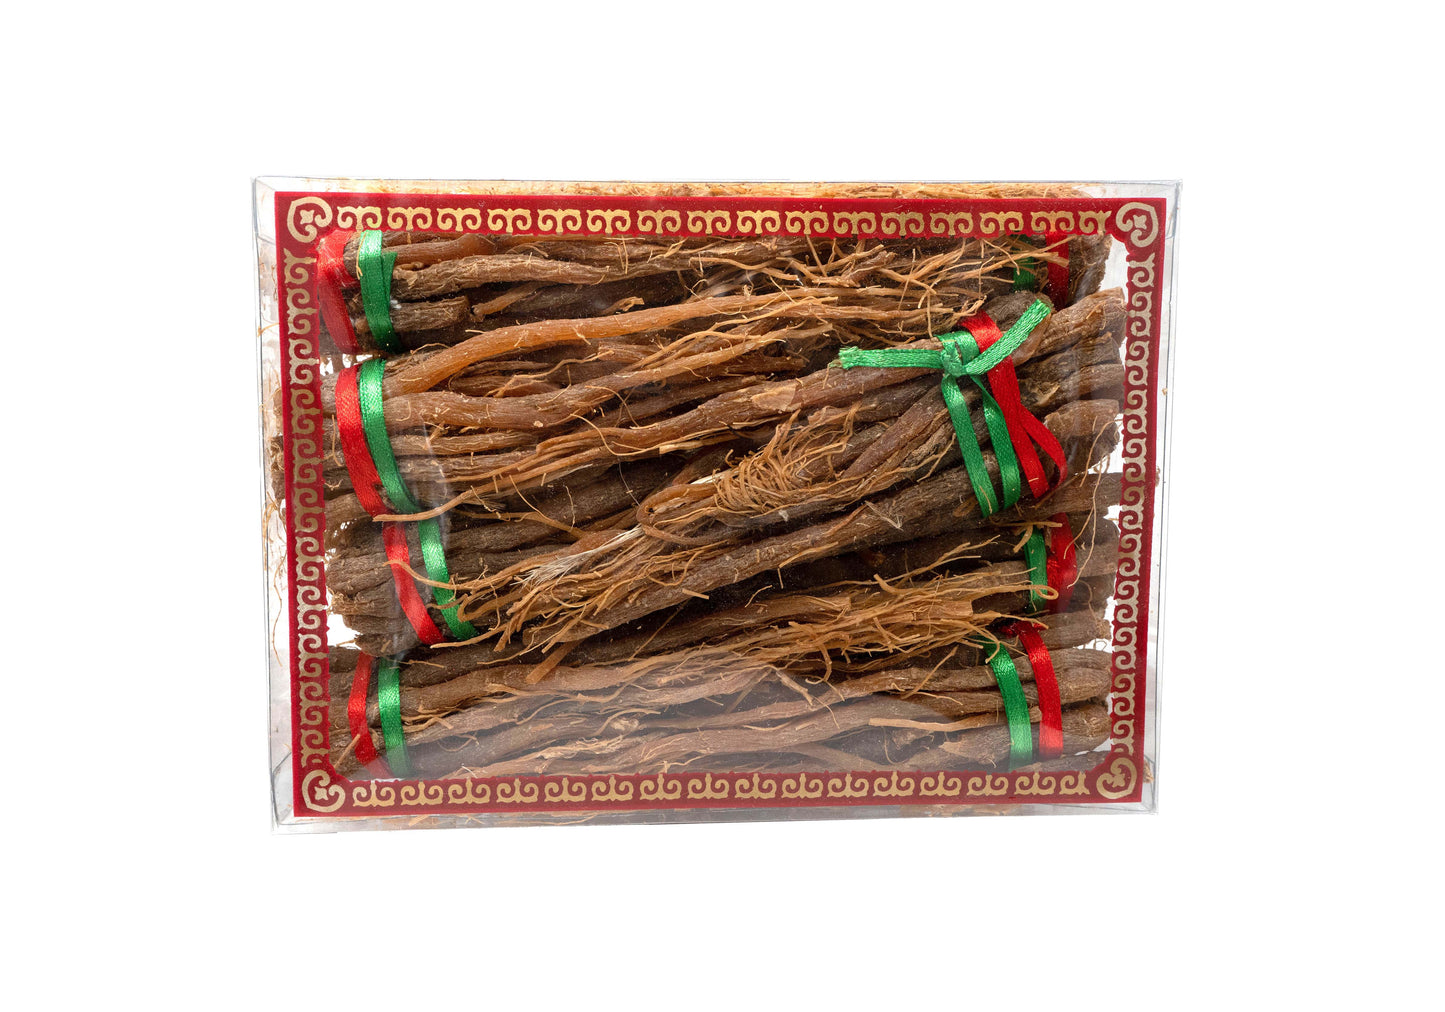 Red Ginseng Root 紅參須